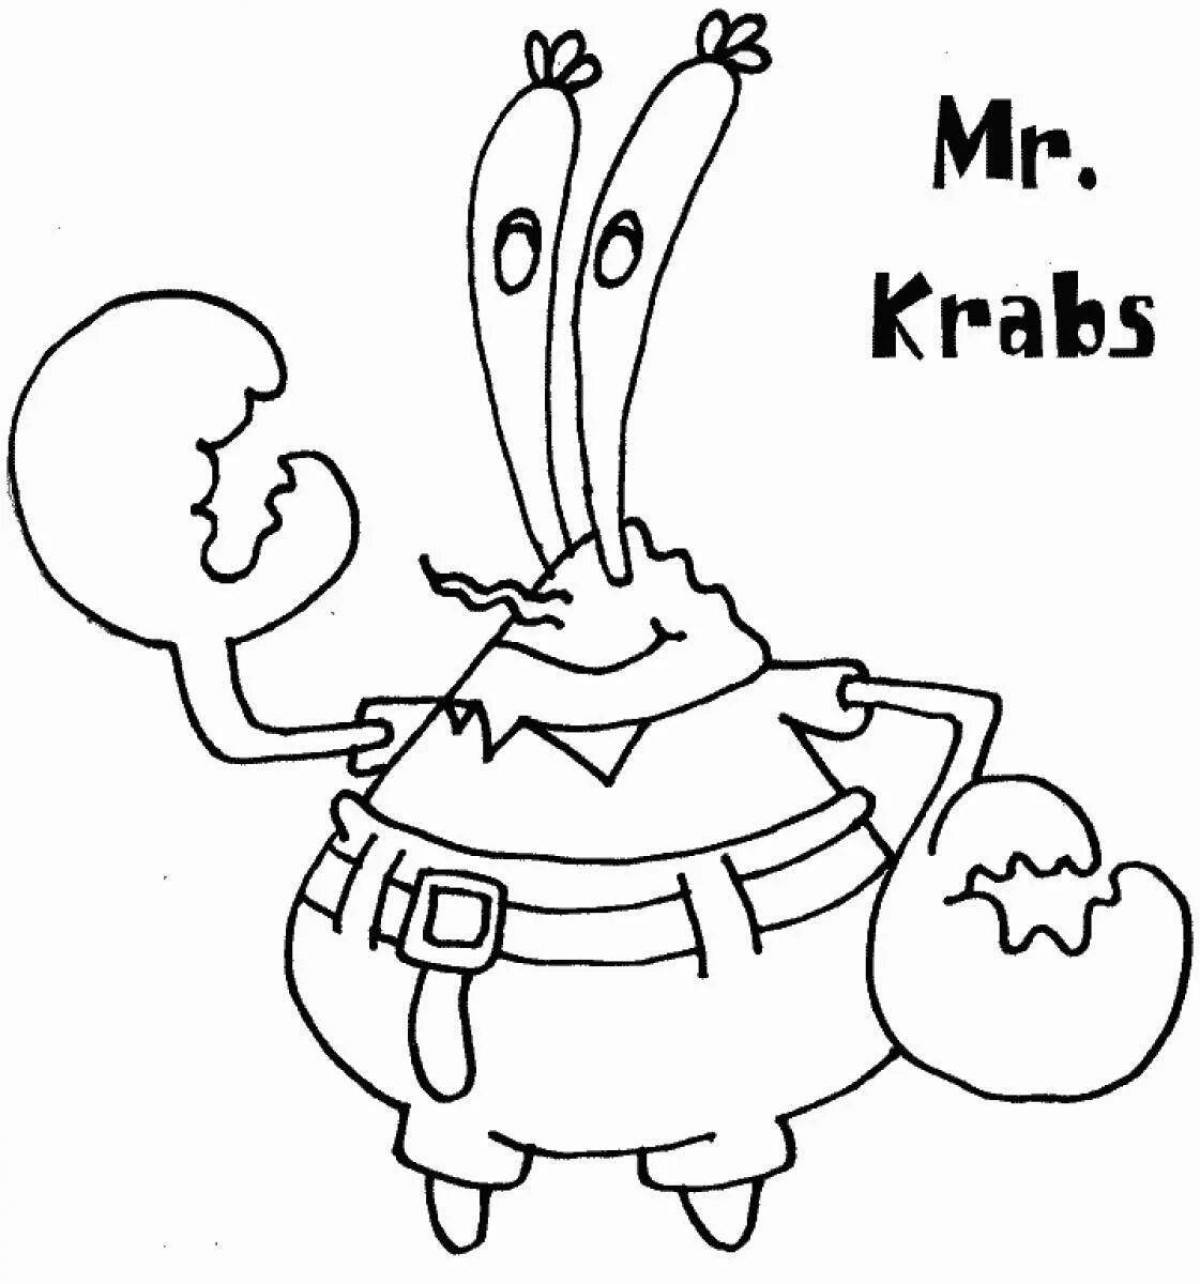 Coloring the bold krusty krab